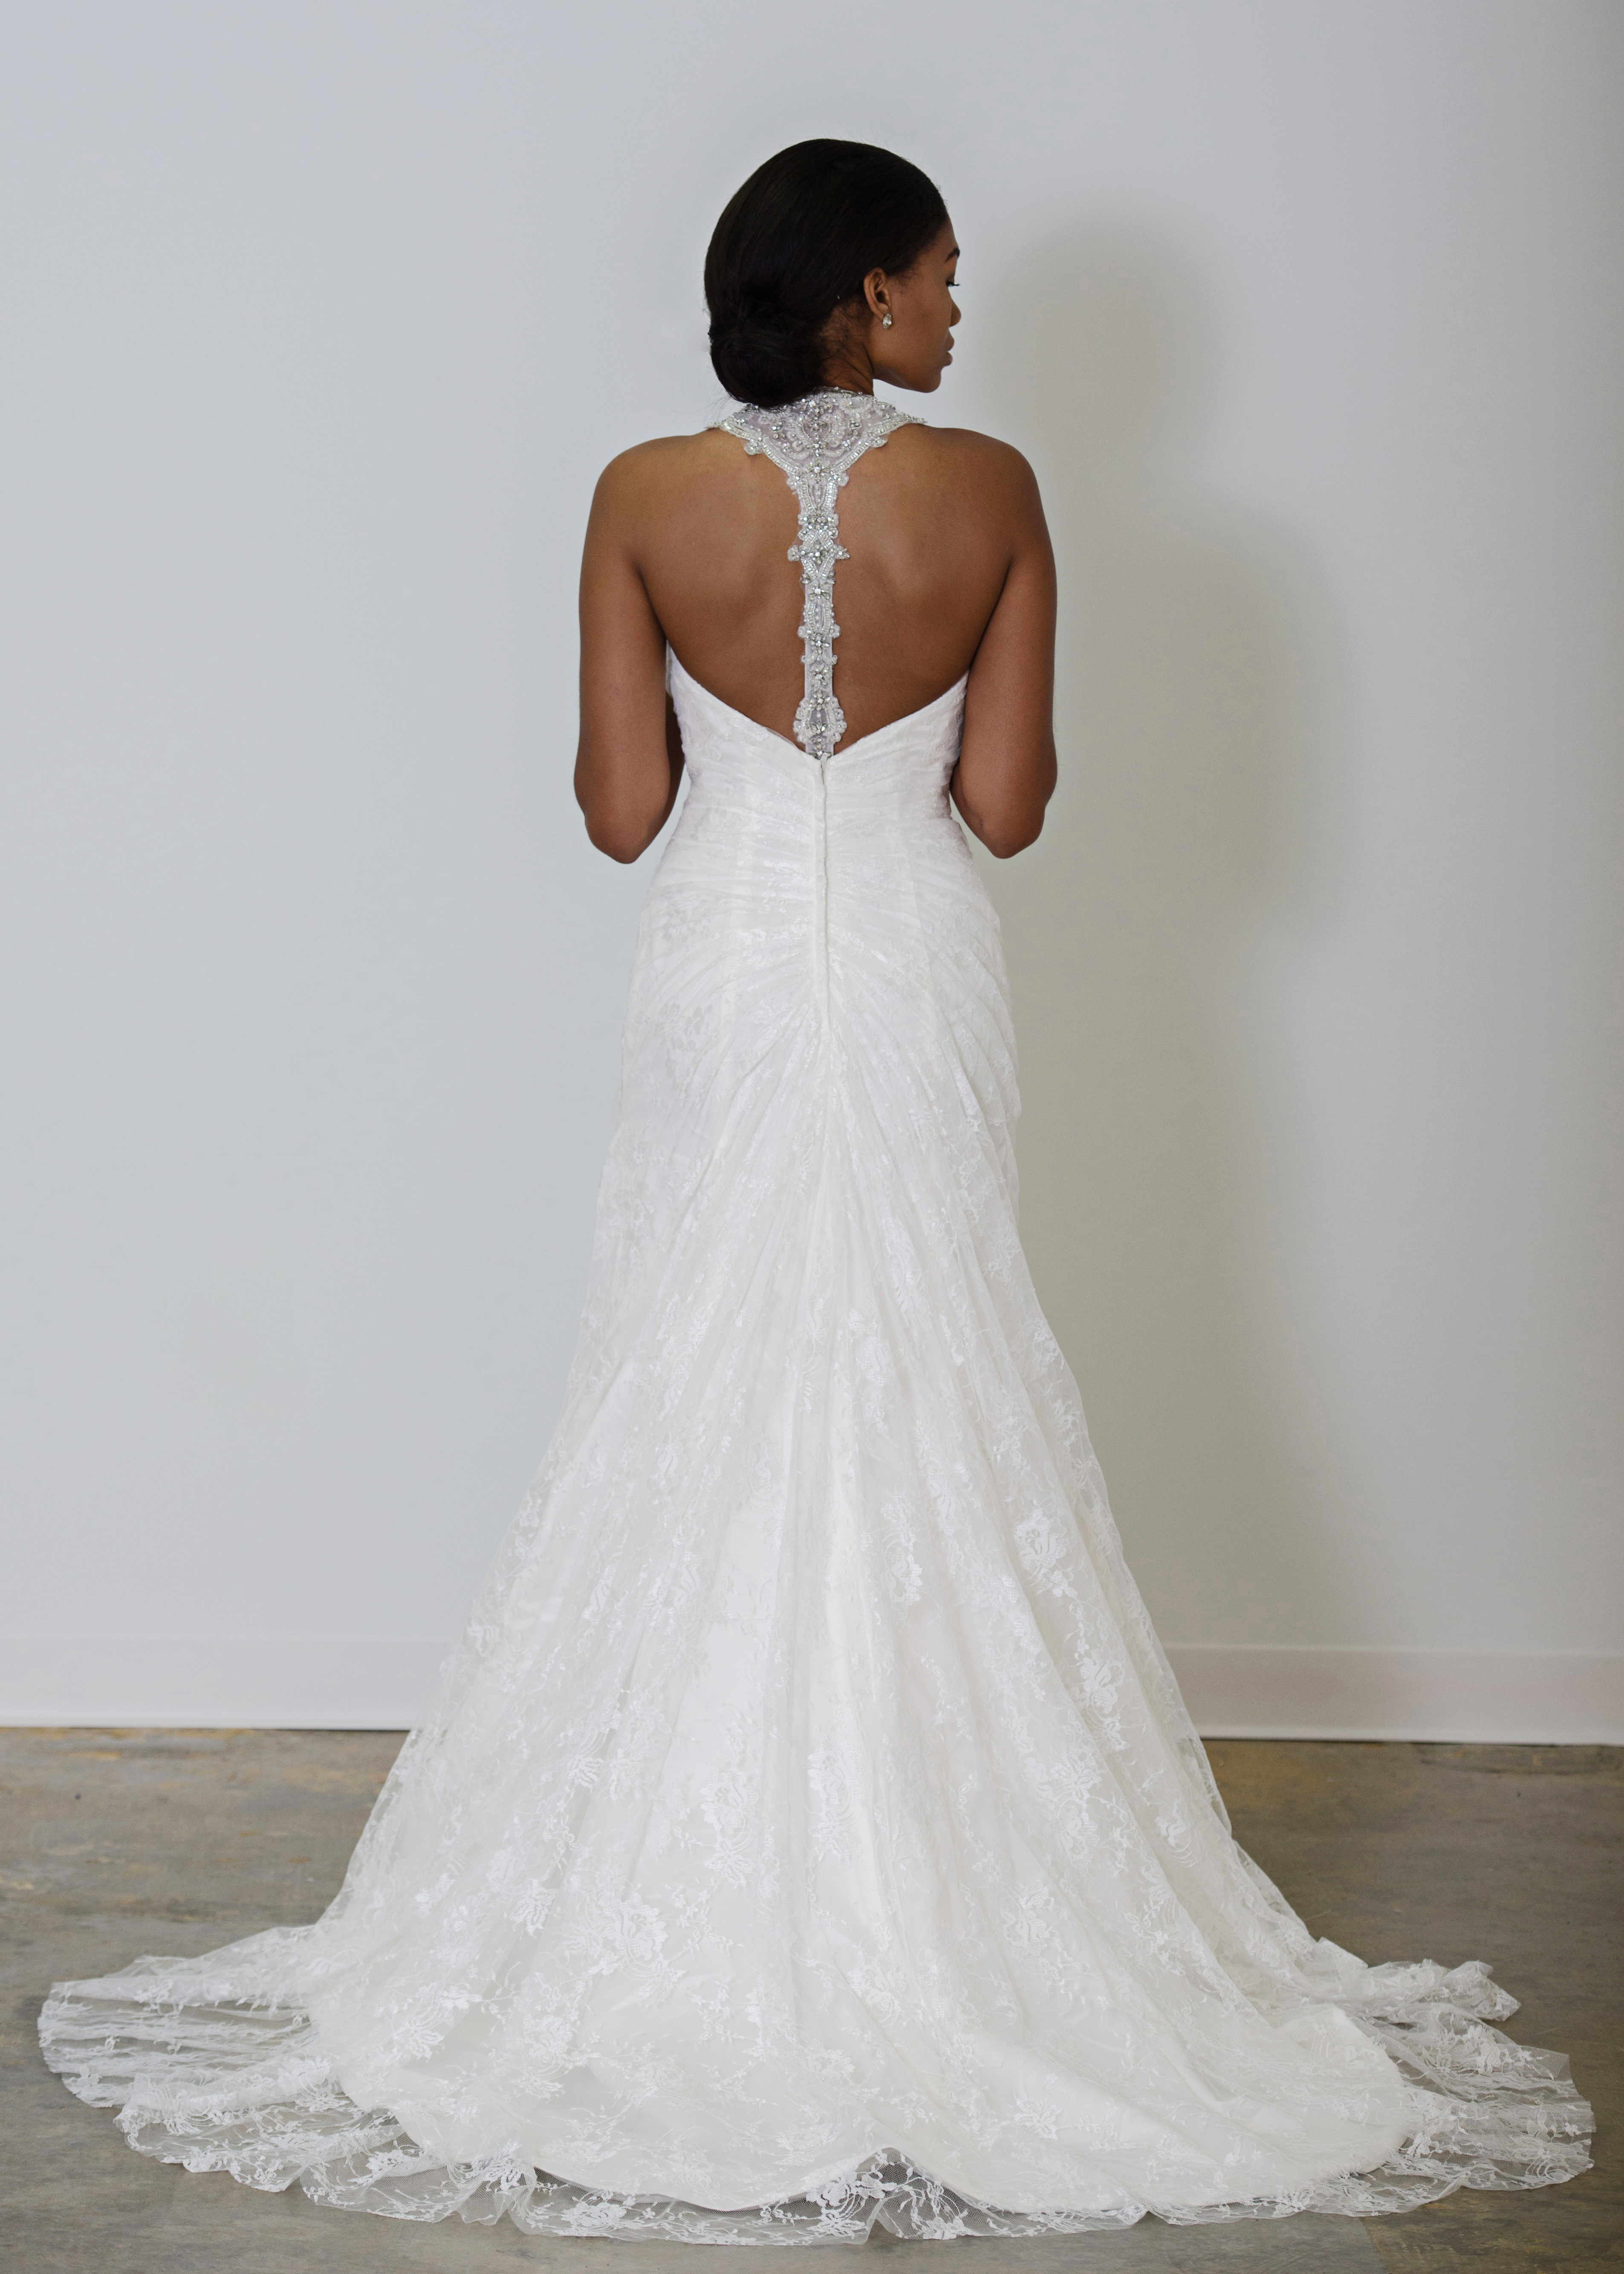  Wedding Dresses For Sale Cheap in the world Learn more here 